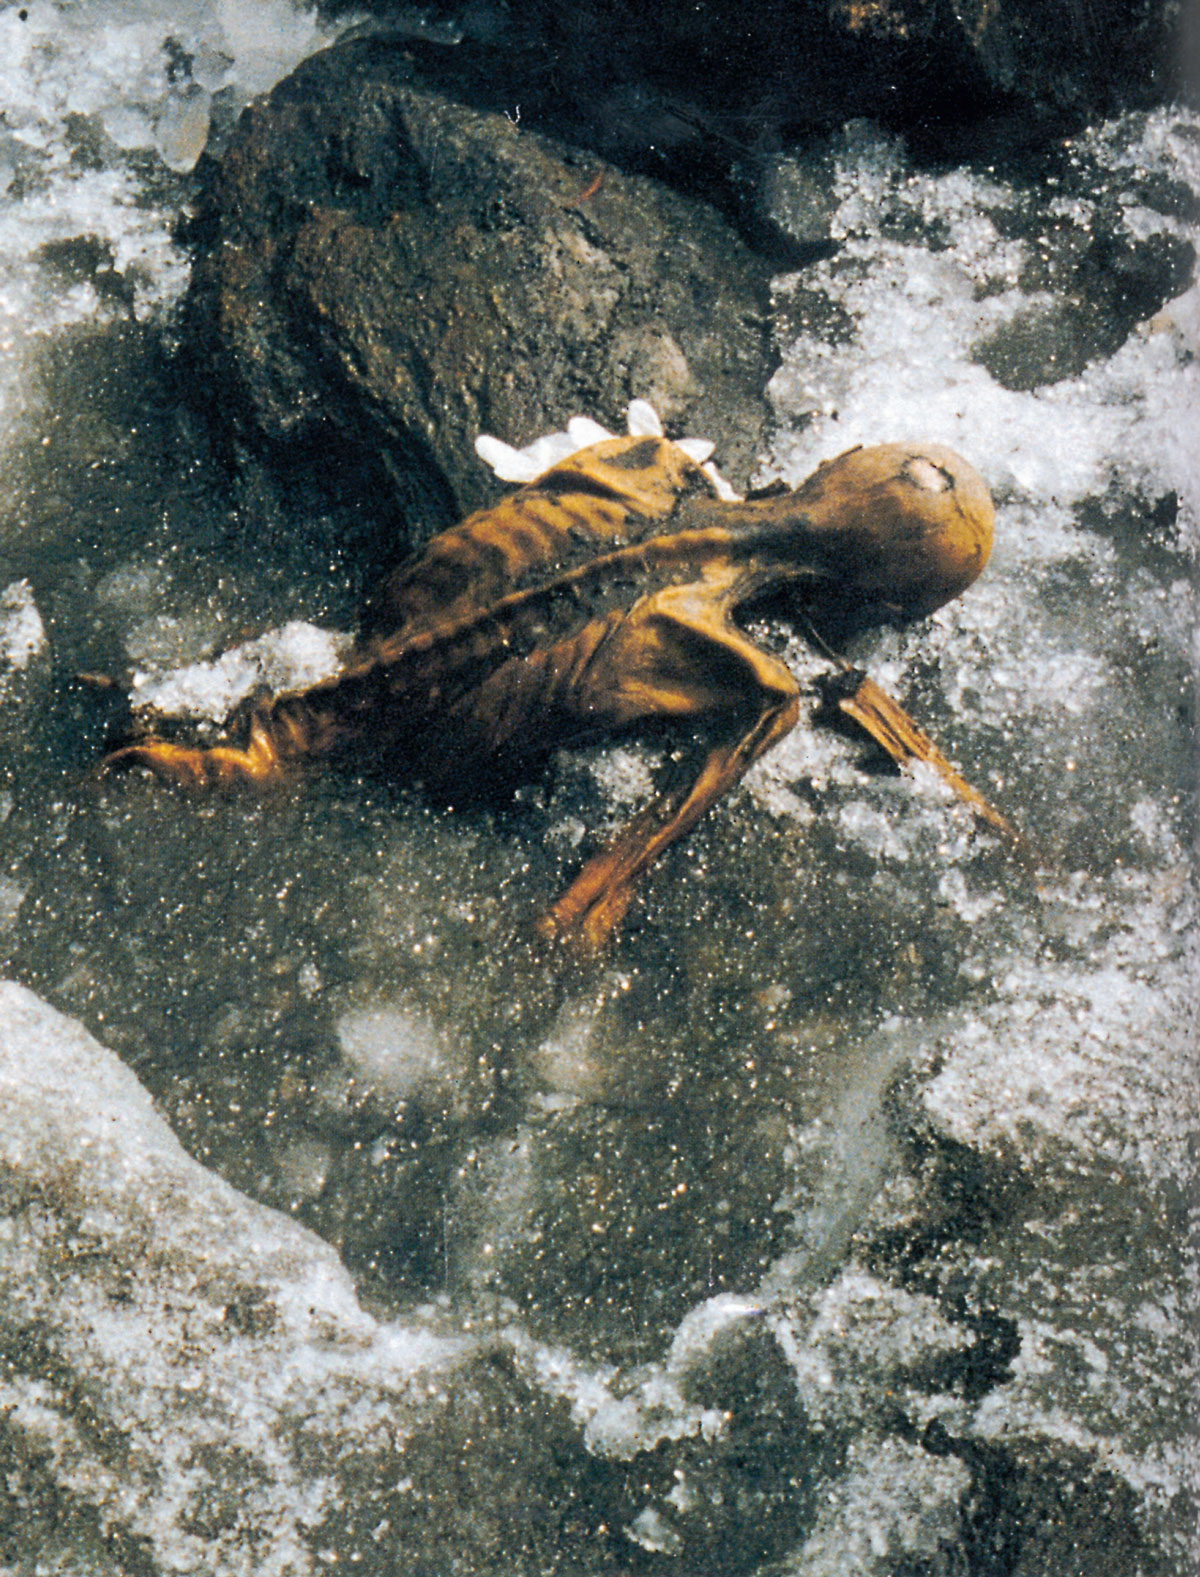 The iceman after the first recovery attempt by a police officer,
20 September 1991.